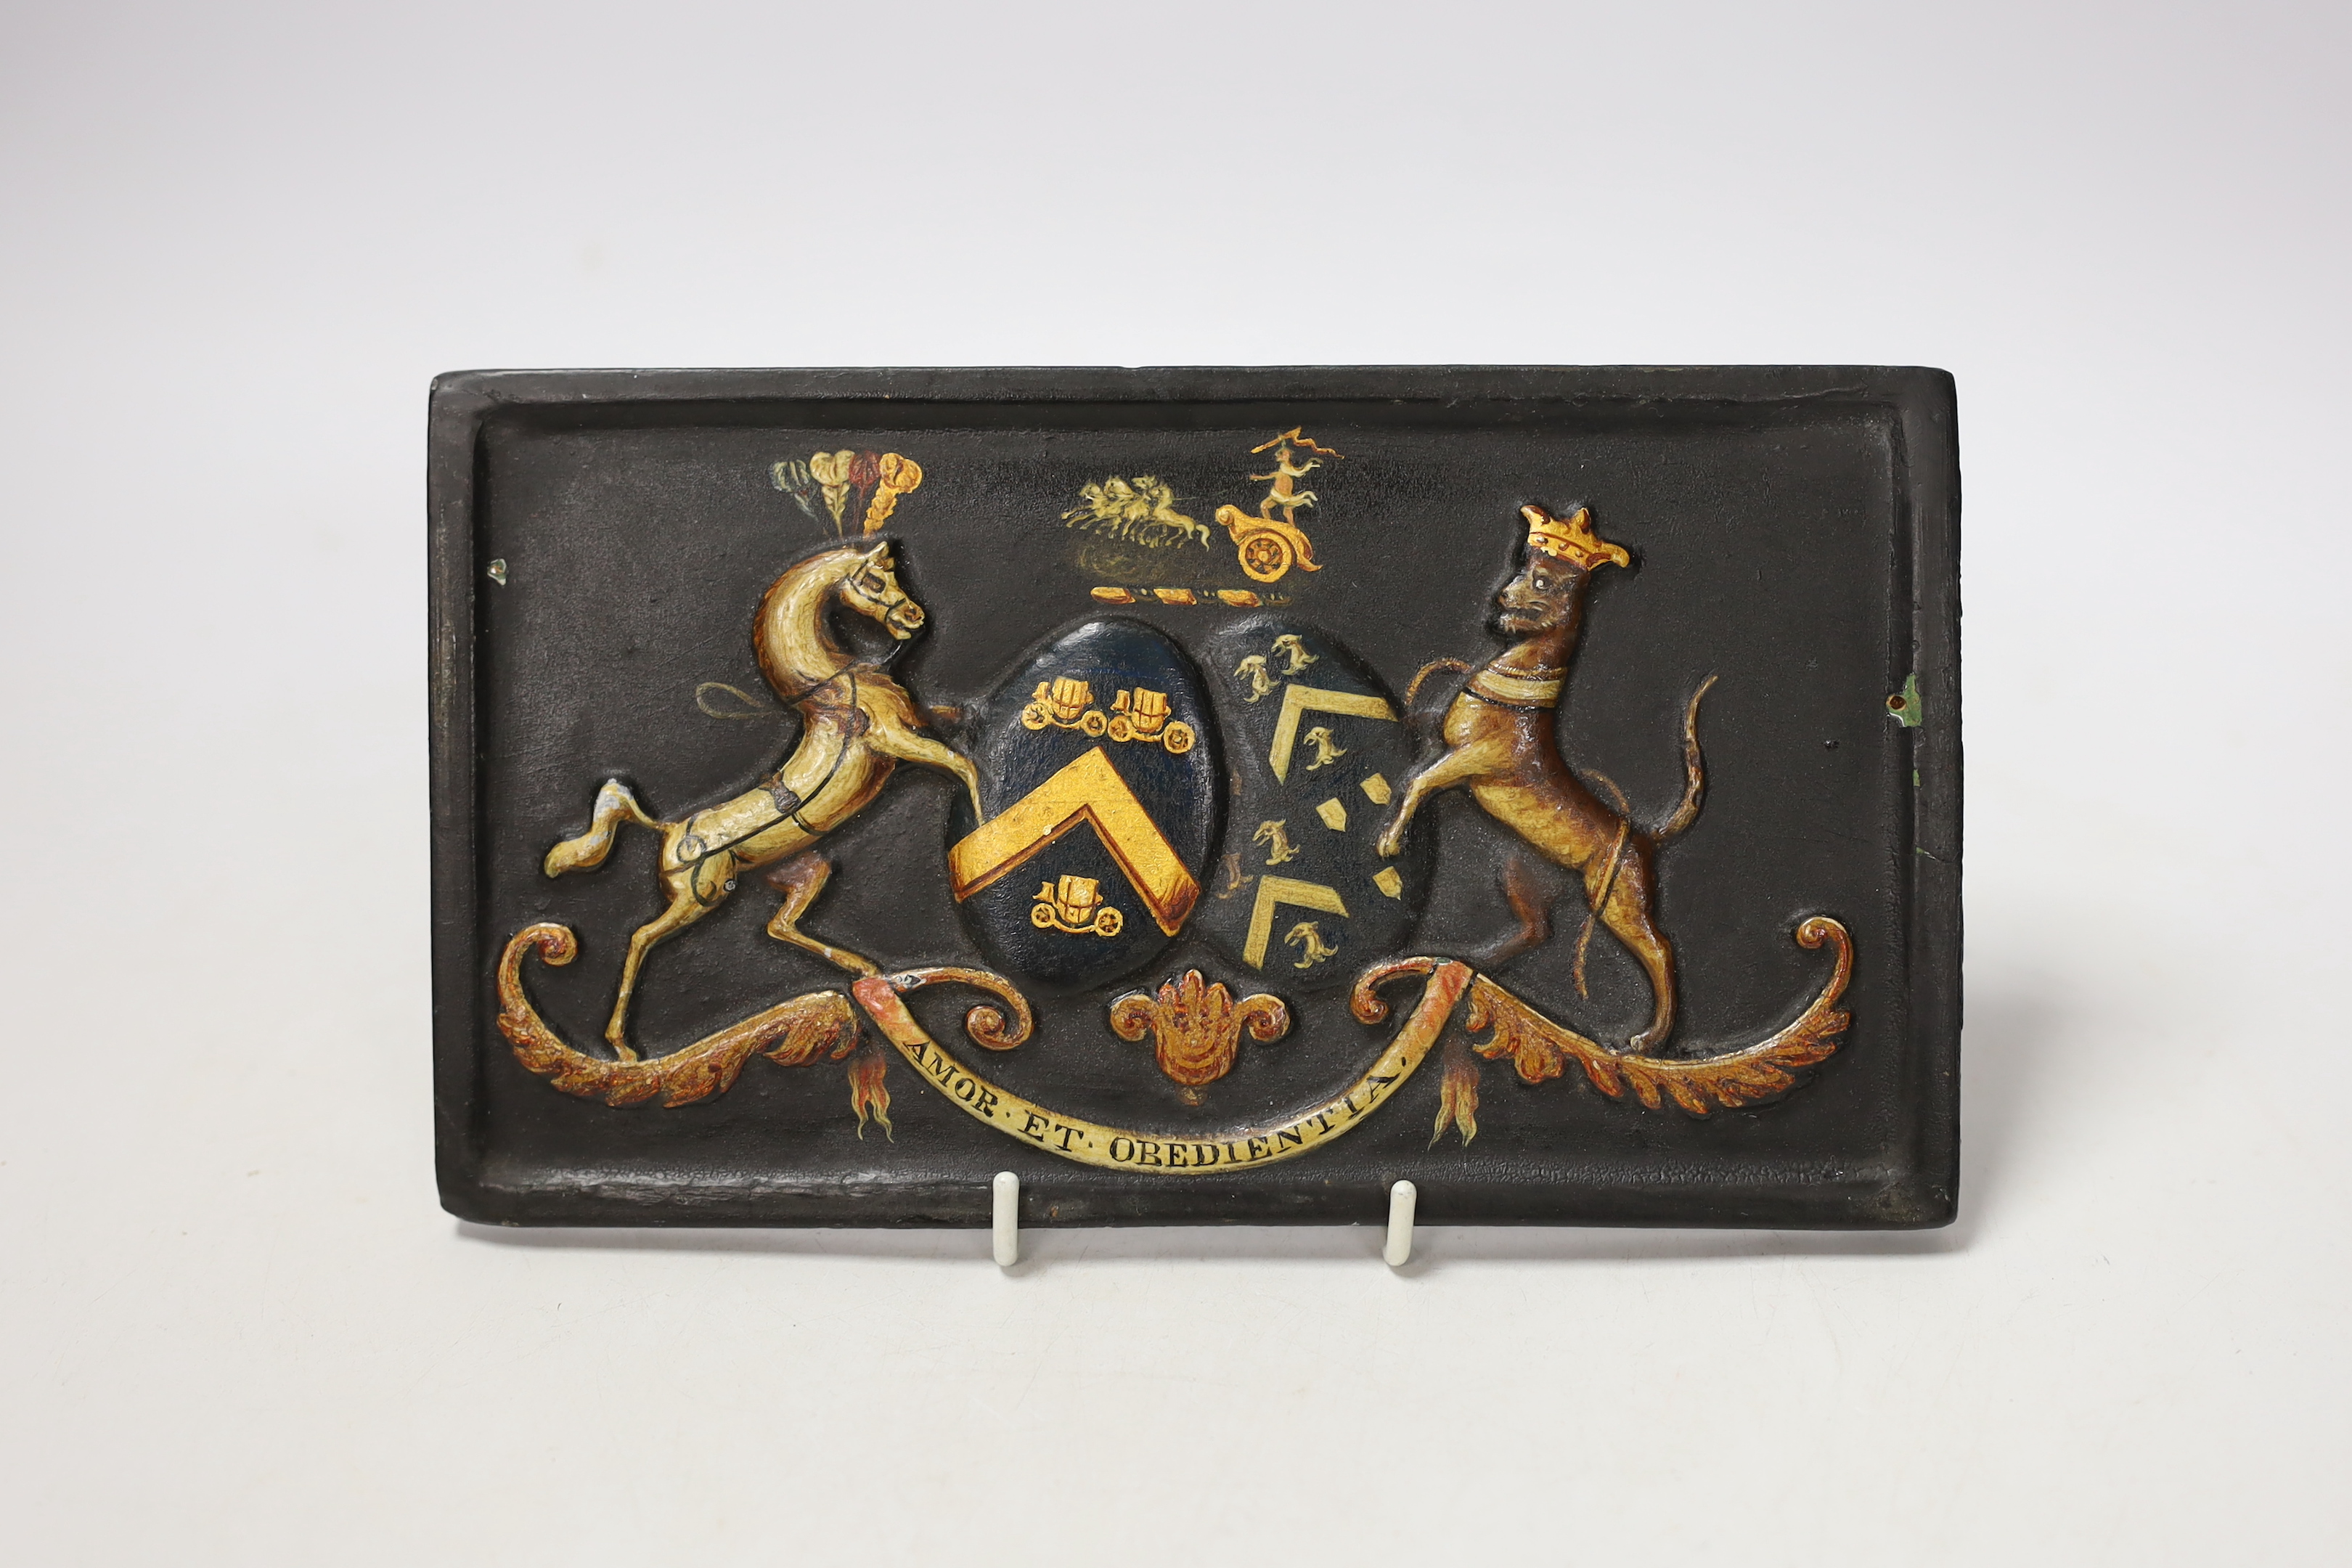 A 19th century painted and carved wood armorial coach panel, 12 x 21cm